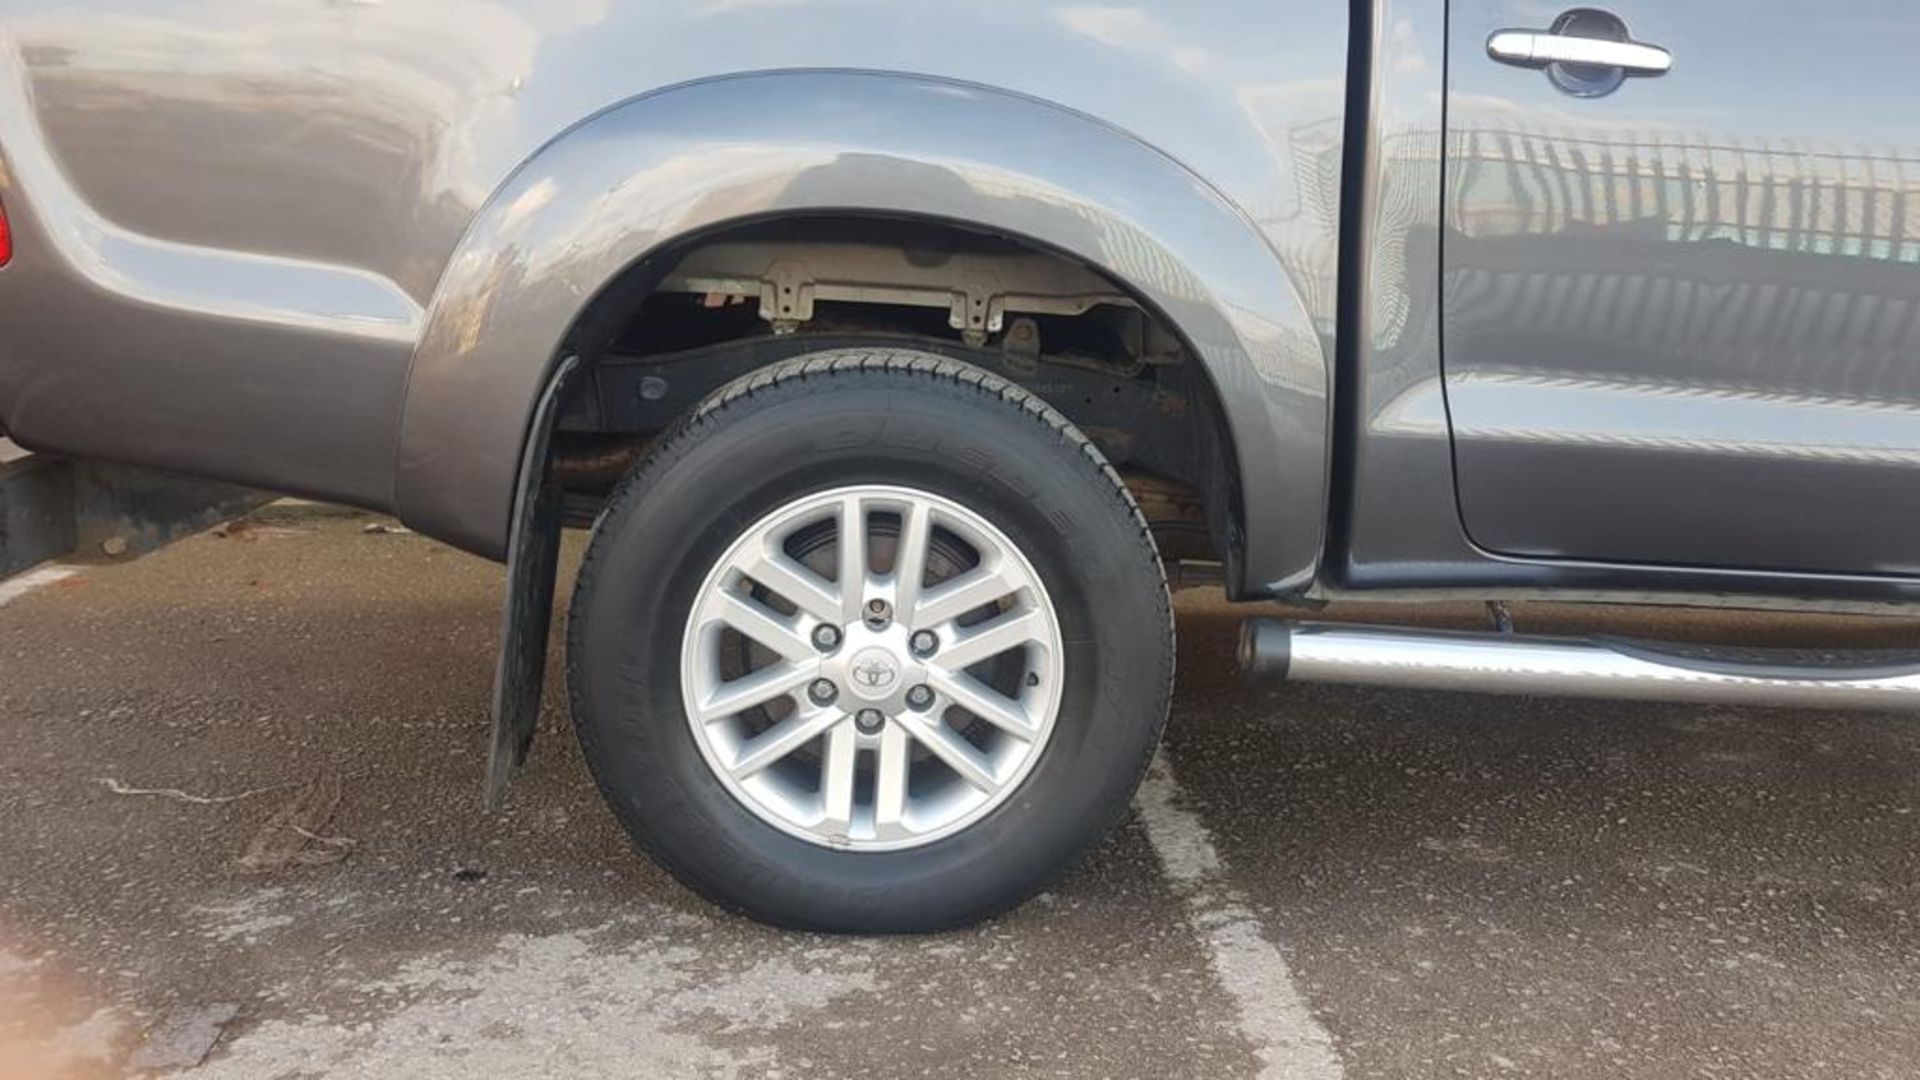 2015/64 REG TOYOTA HILUX INVINCIBLE D-4D 4X4 GREY DIESEL LIGHT UTILITY, SHOWING 1 FORMER KEEPER - Image 20 of 22